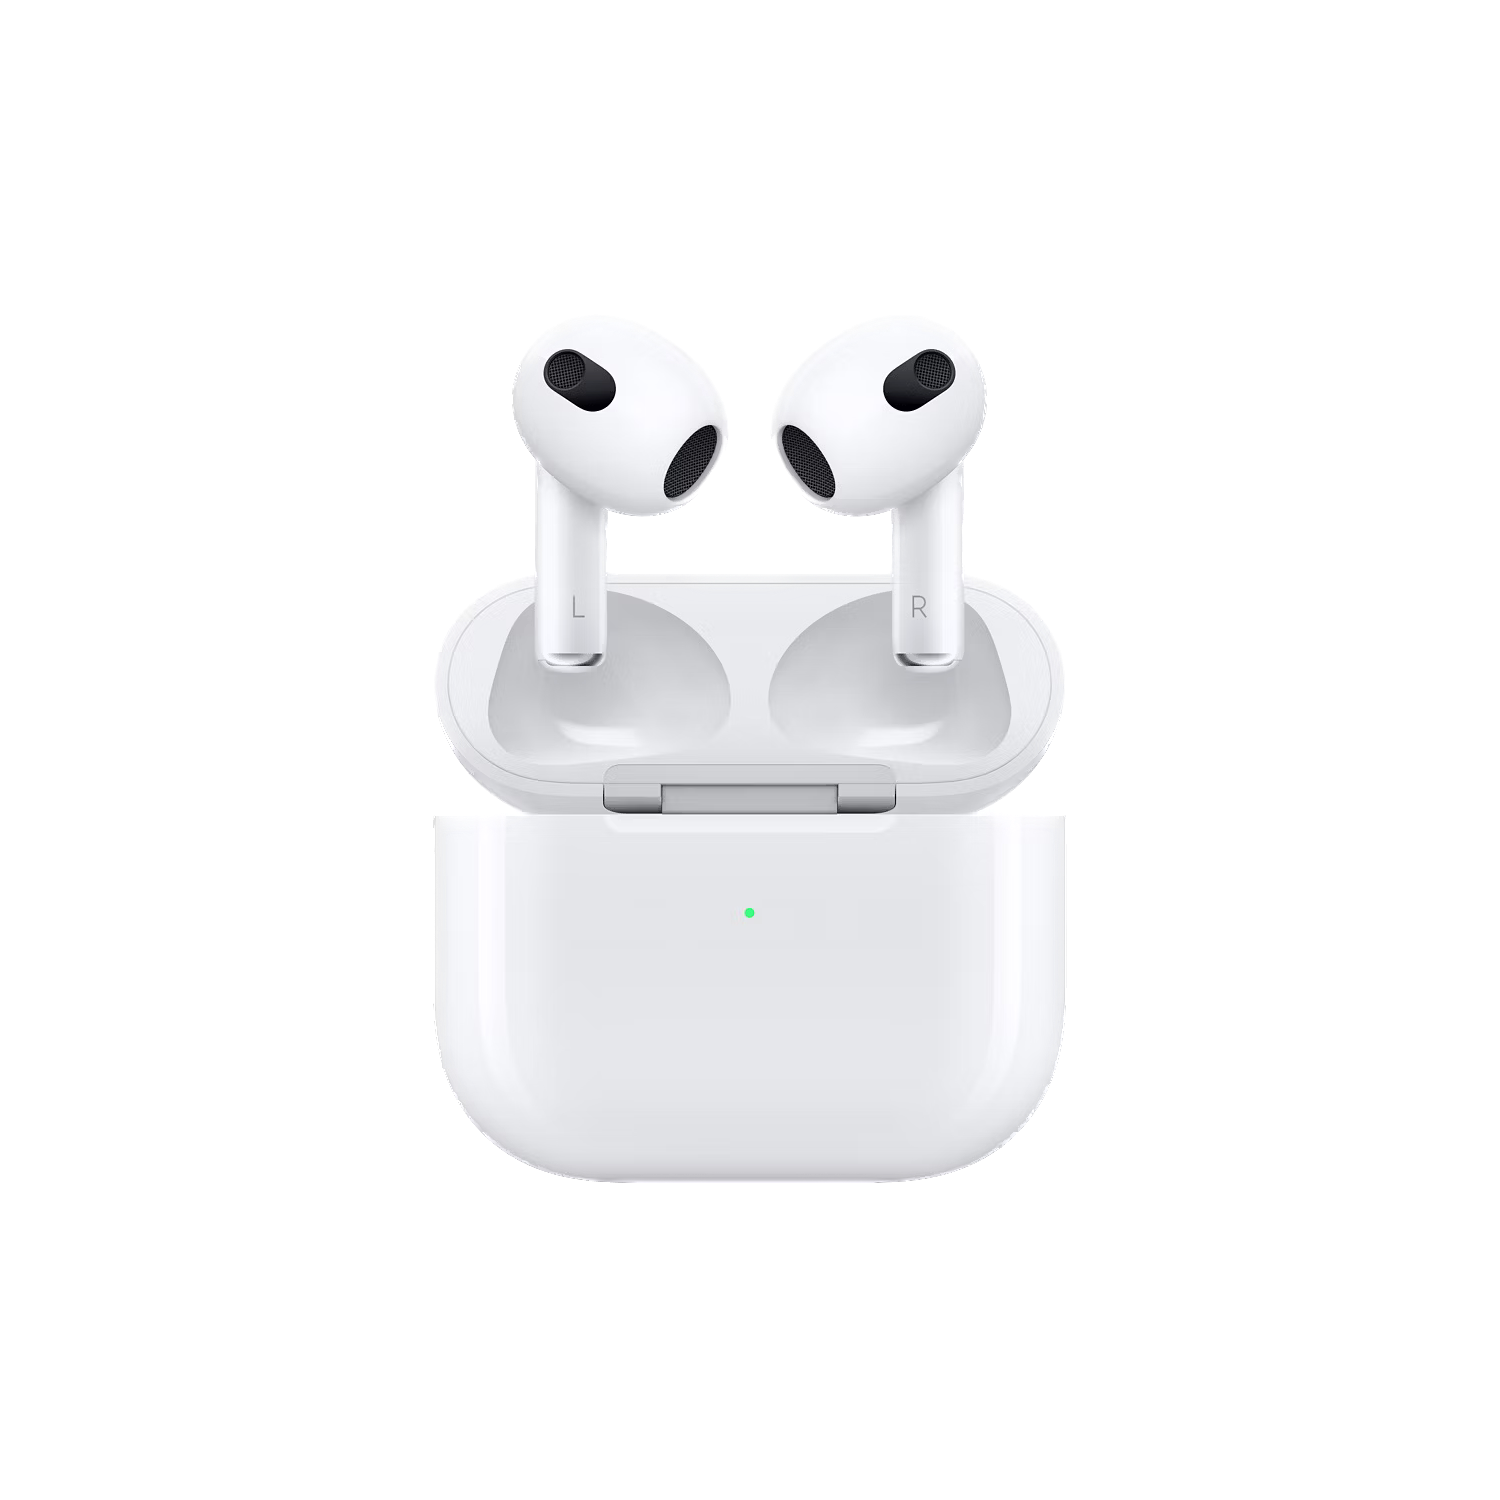 AirPods 3 review: The best of both worlds for most Apple users